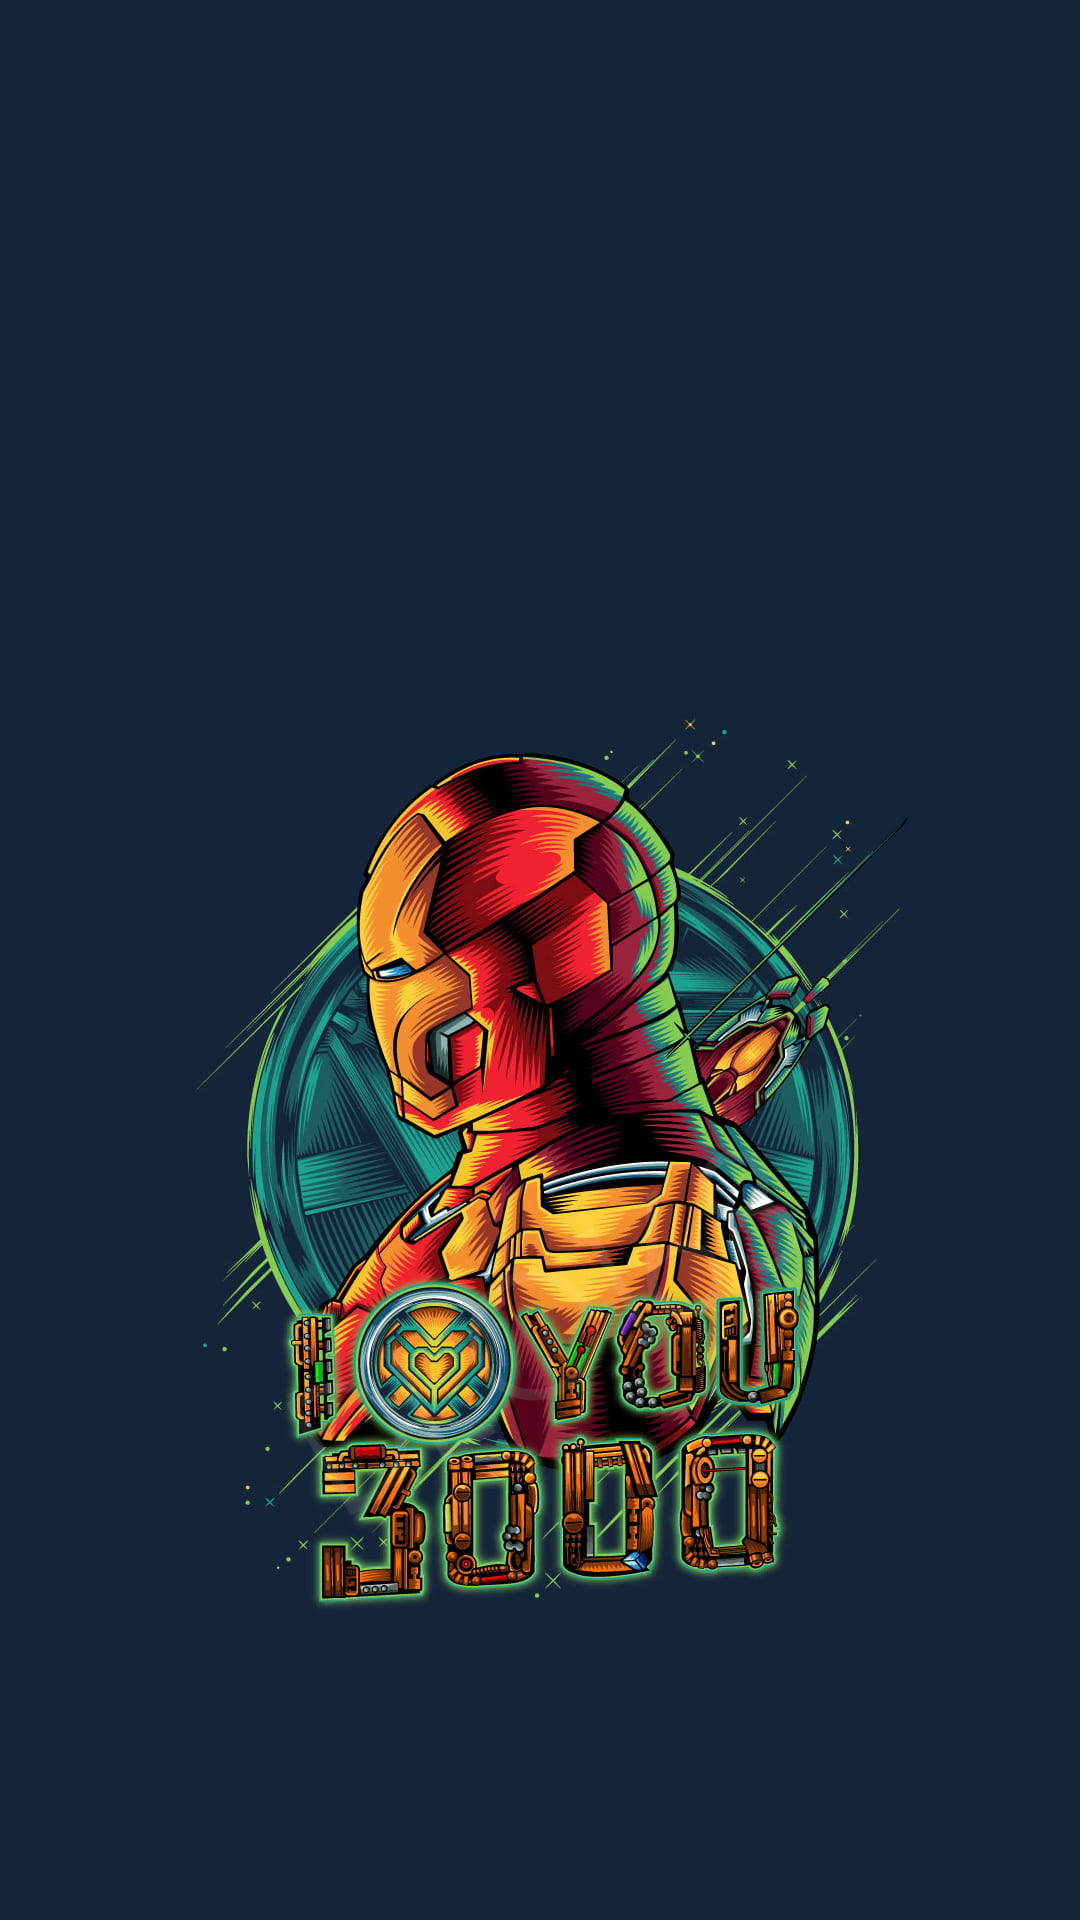 Popular Quote Of Iron Man Android Wallpaper